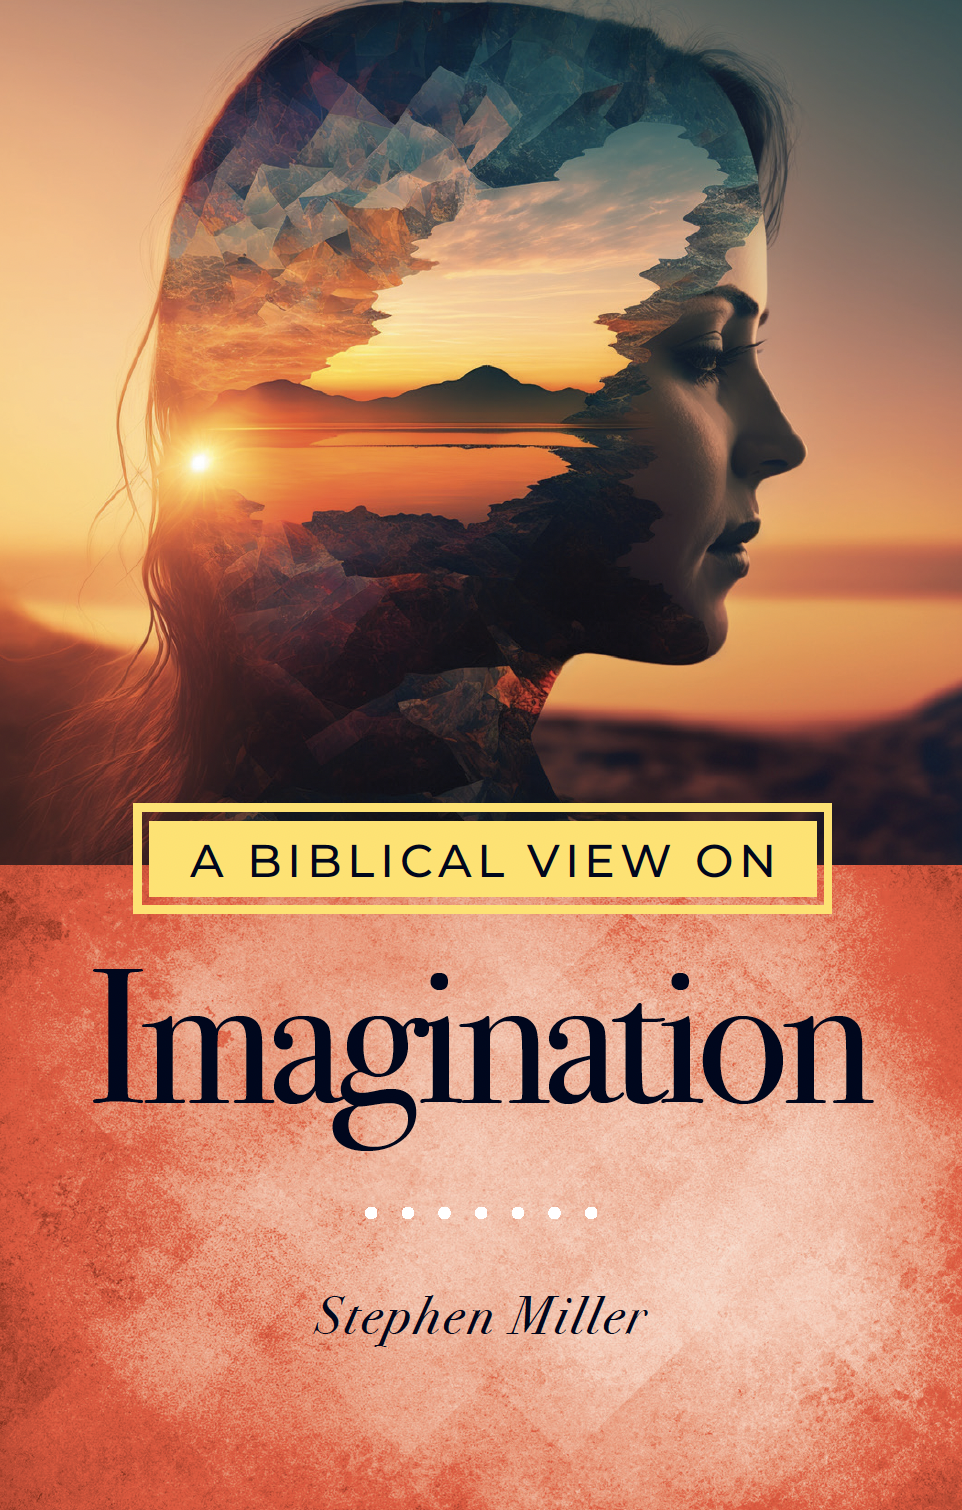 Imagination Booklet Cover